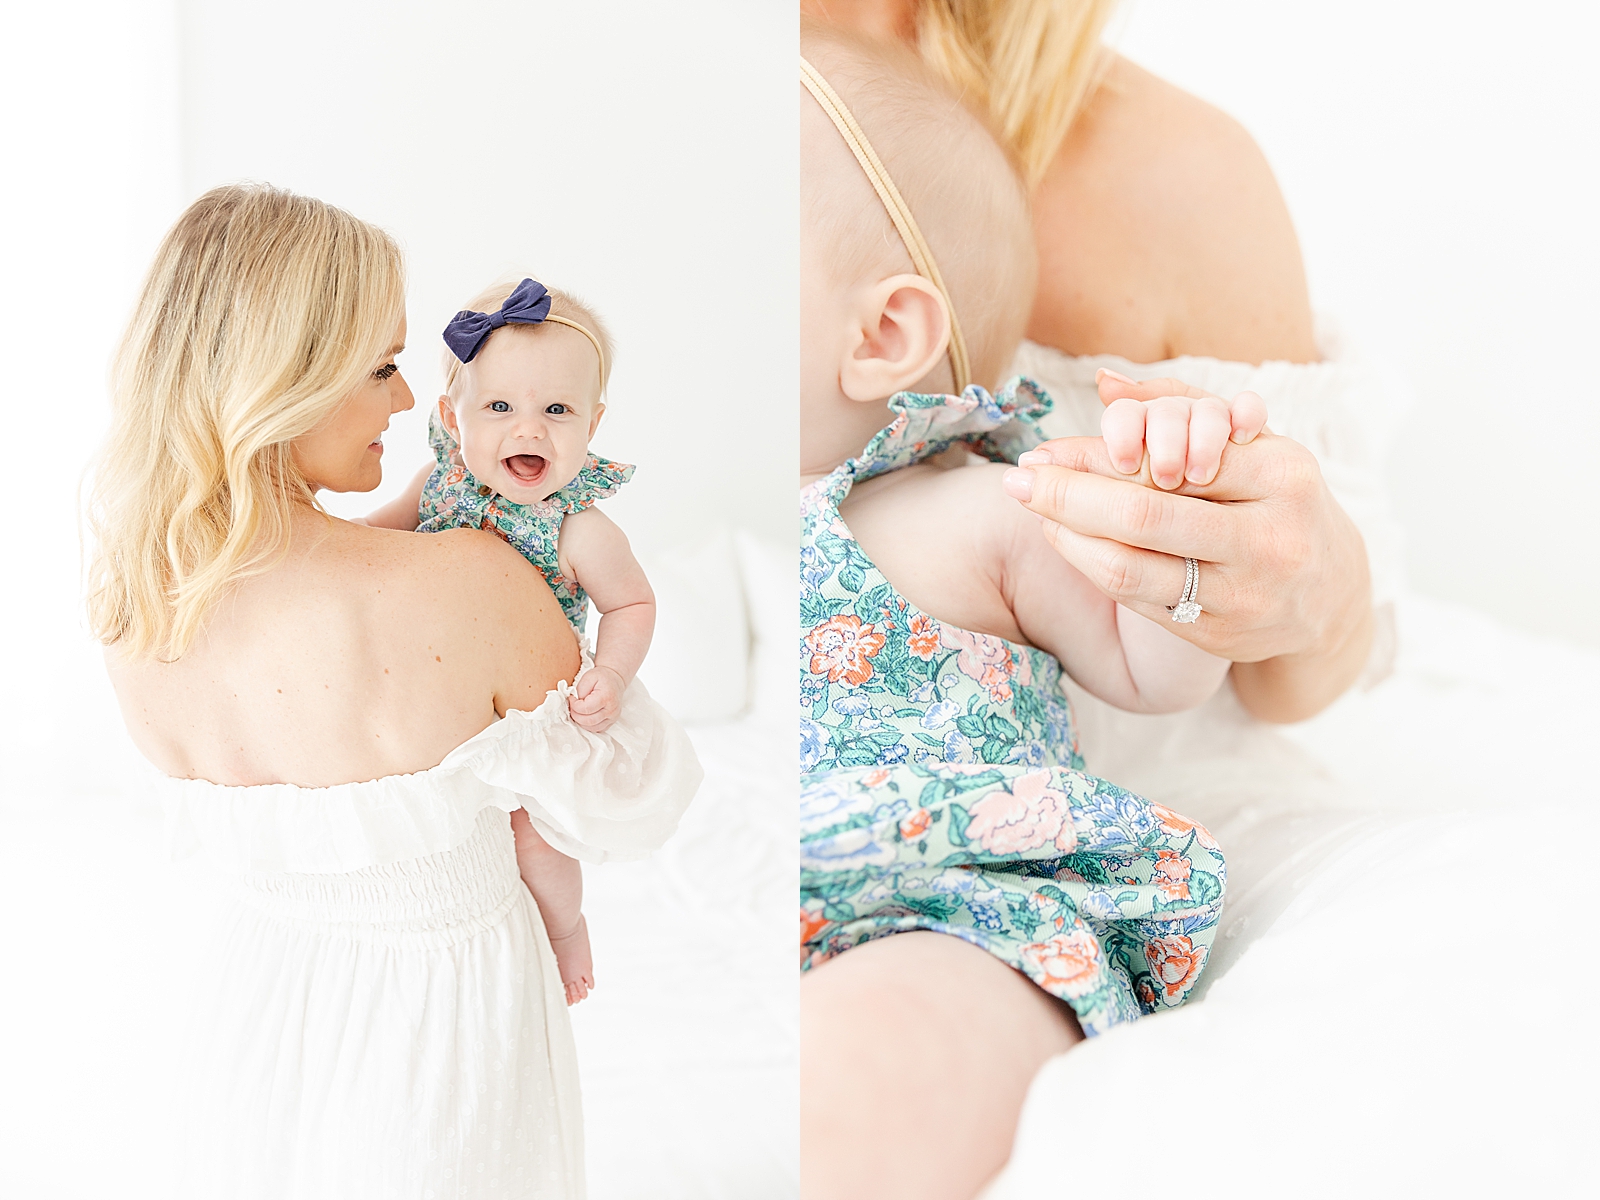 studio family session blonde mom in white dress holding baby girl over her shoulder smiling and image of her holding baby hand with a close up on wedding ring